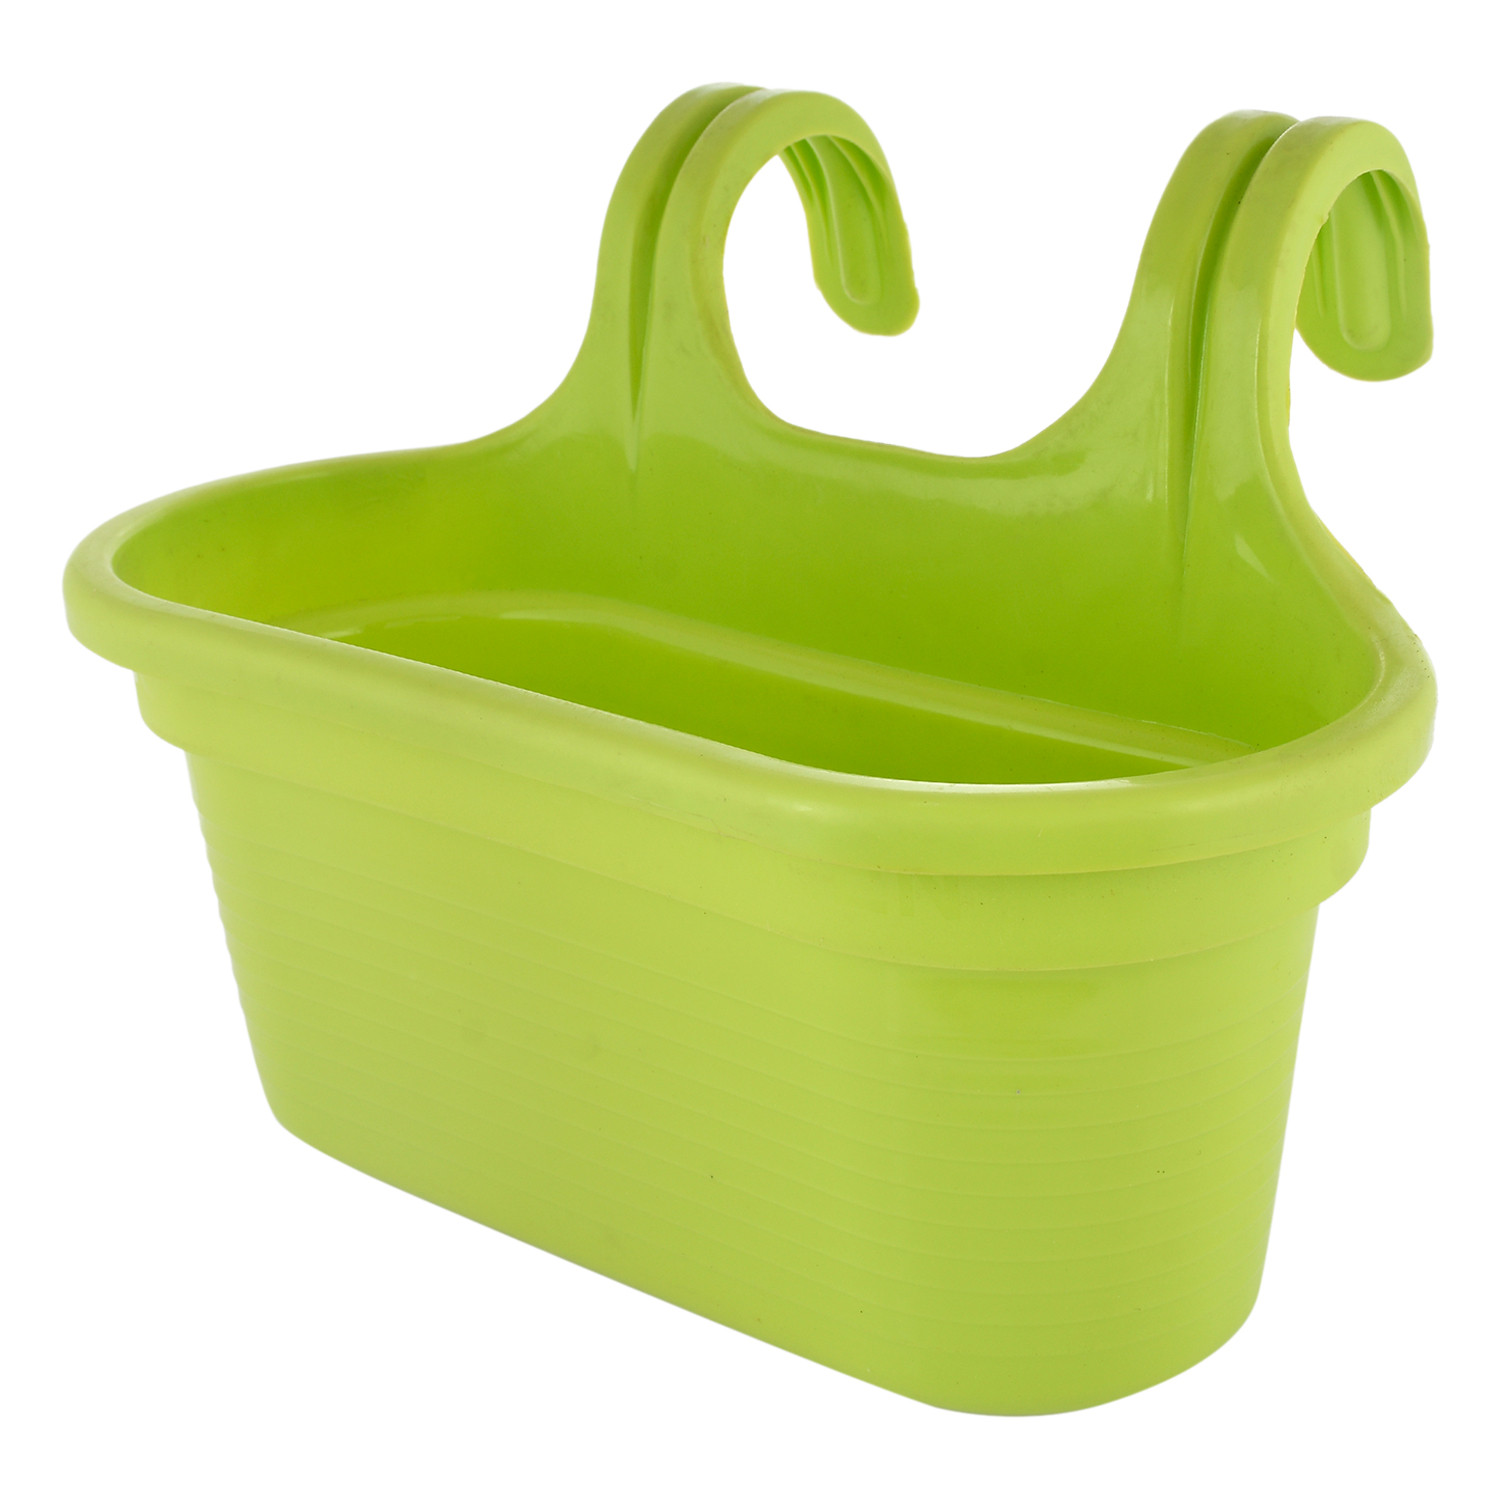 Kuber Industries Hanging Flower Pot|Double Hook Plant Container|Durable Plastic Glossy Finish Pots for Home|Balcony|Garden|12 Inch (Green)